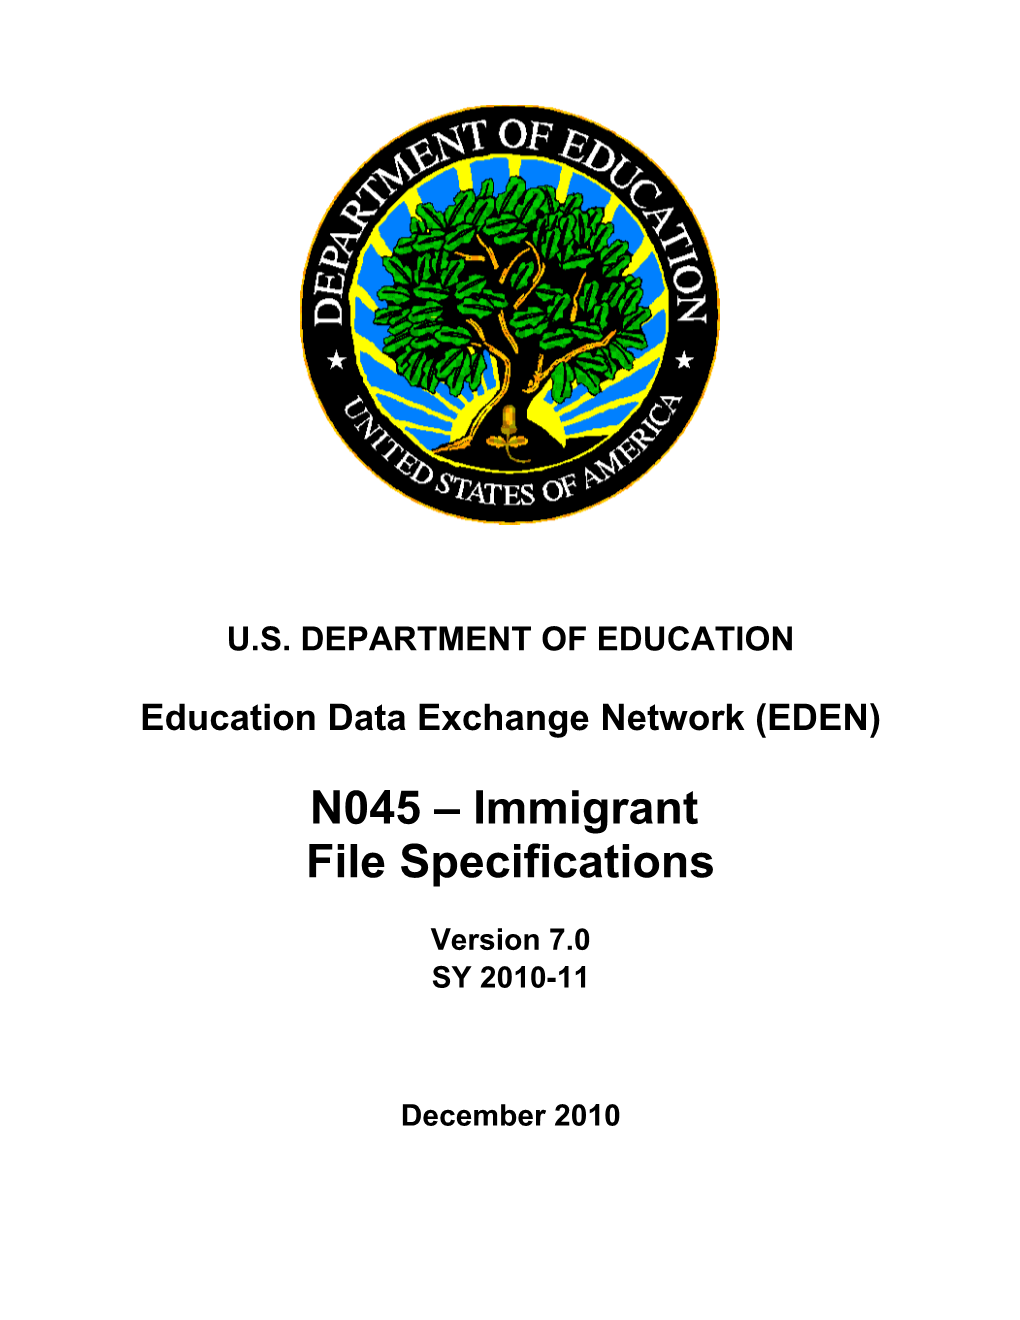 N045- Immigrant File Specifications (MS Word)